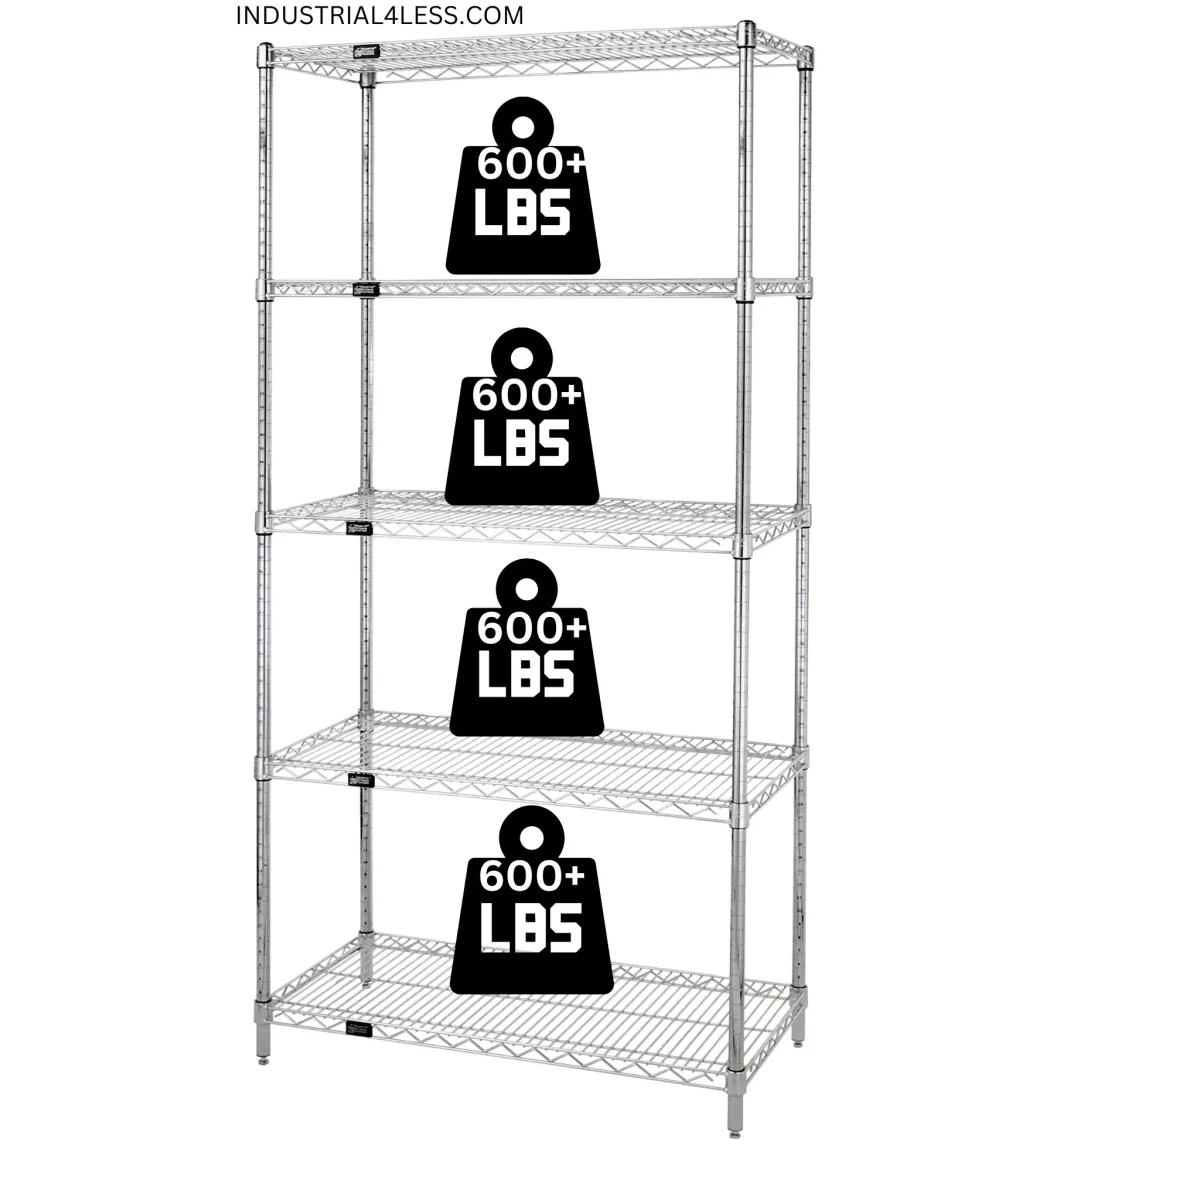 30" x 72" Stainless Steel Wire Shelving Unit - Industrial 4 Less - 30725S-5